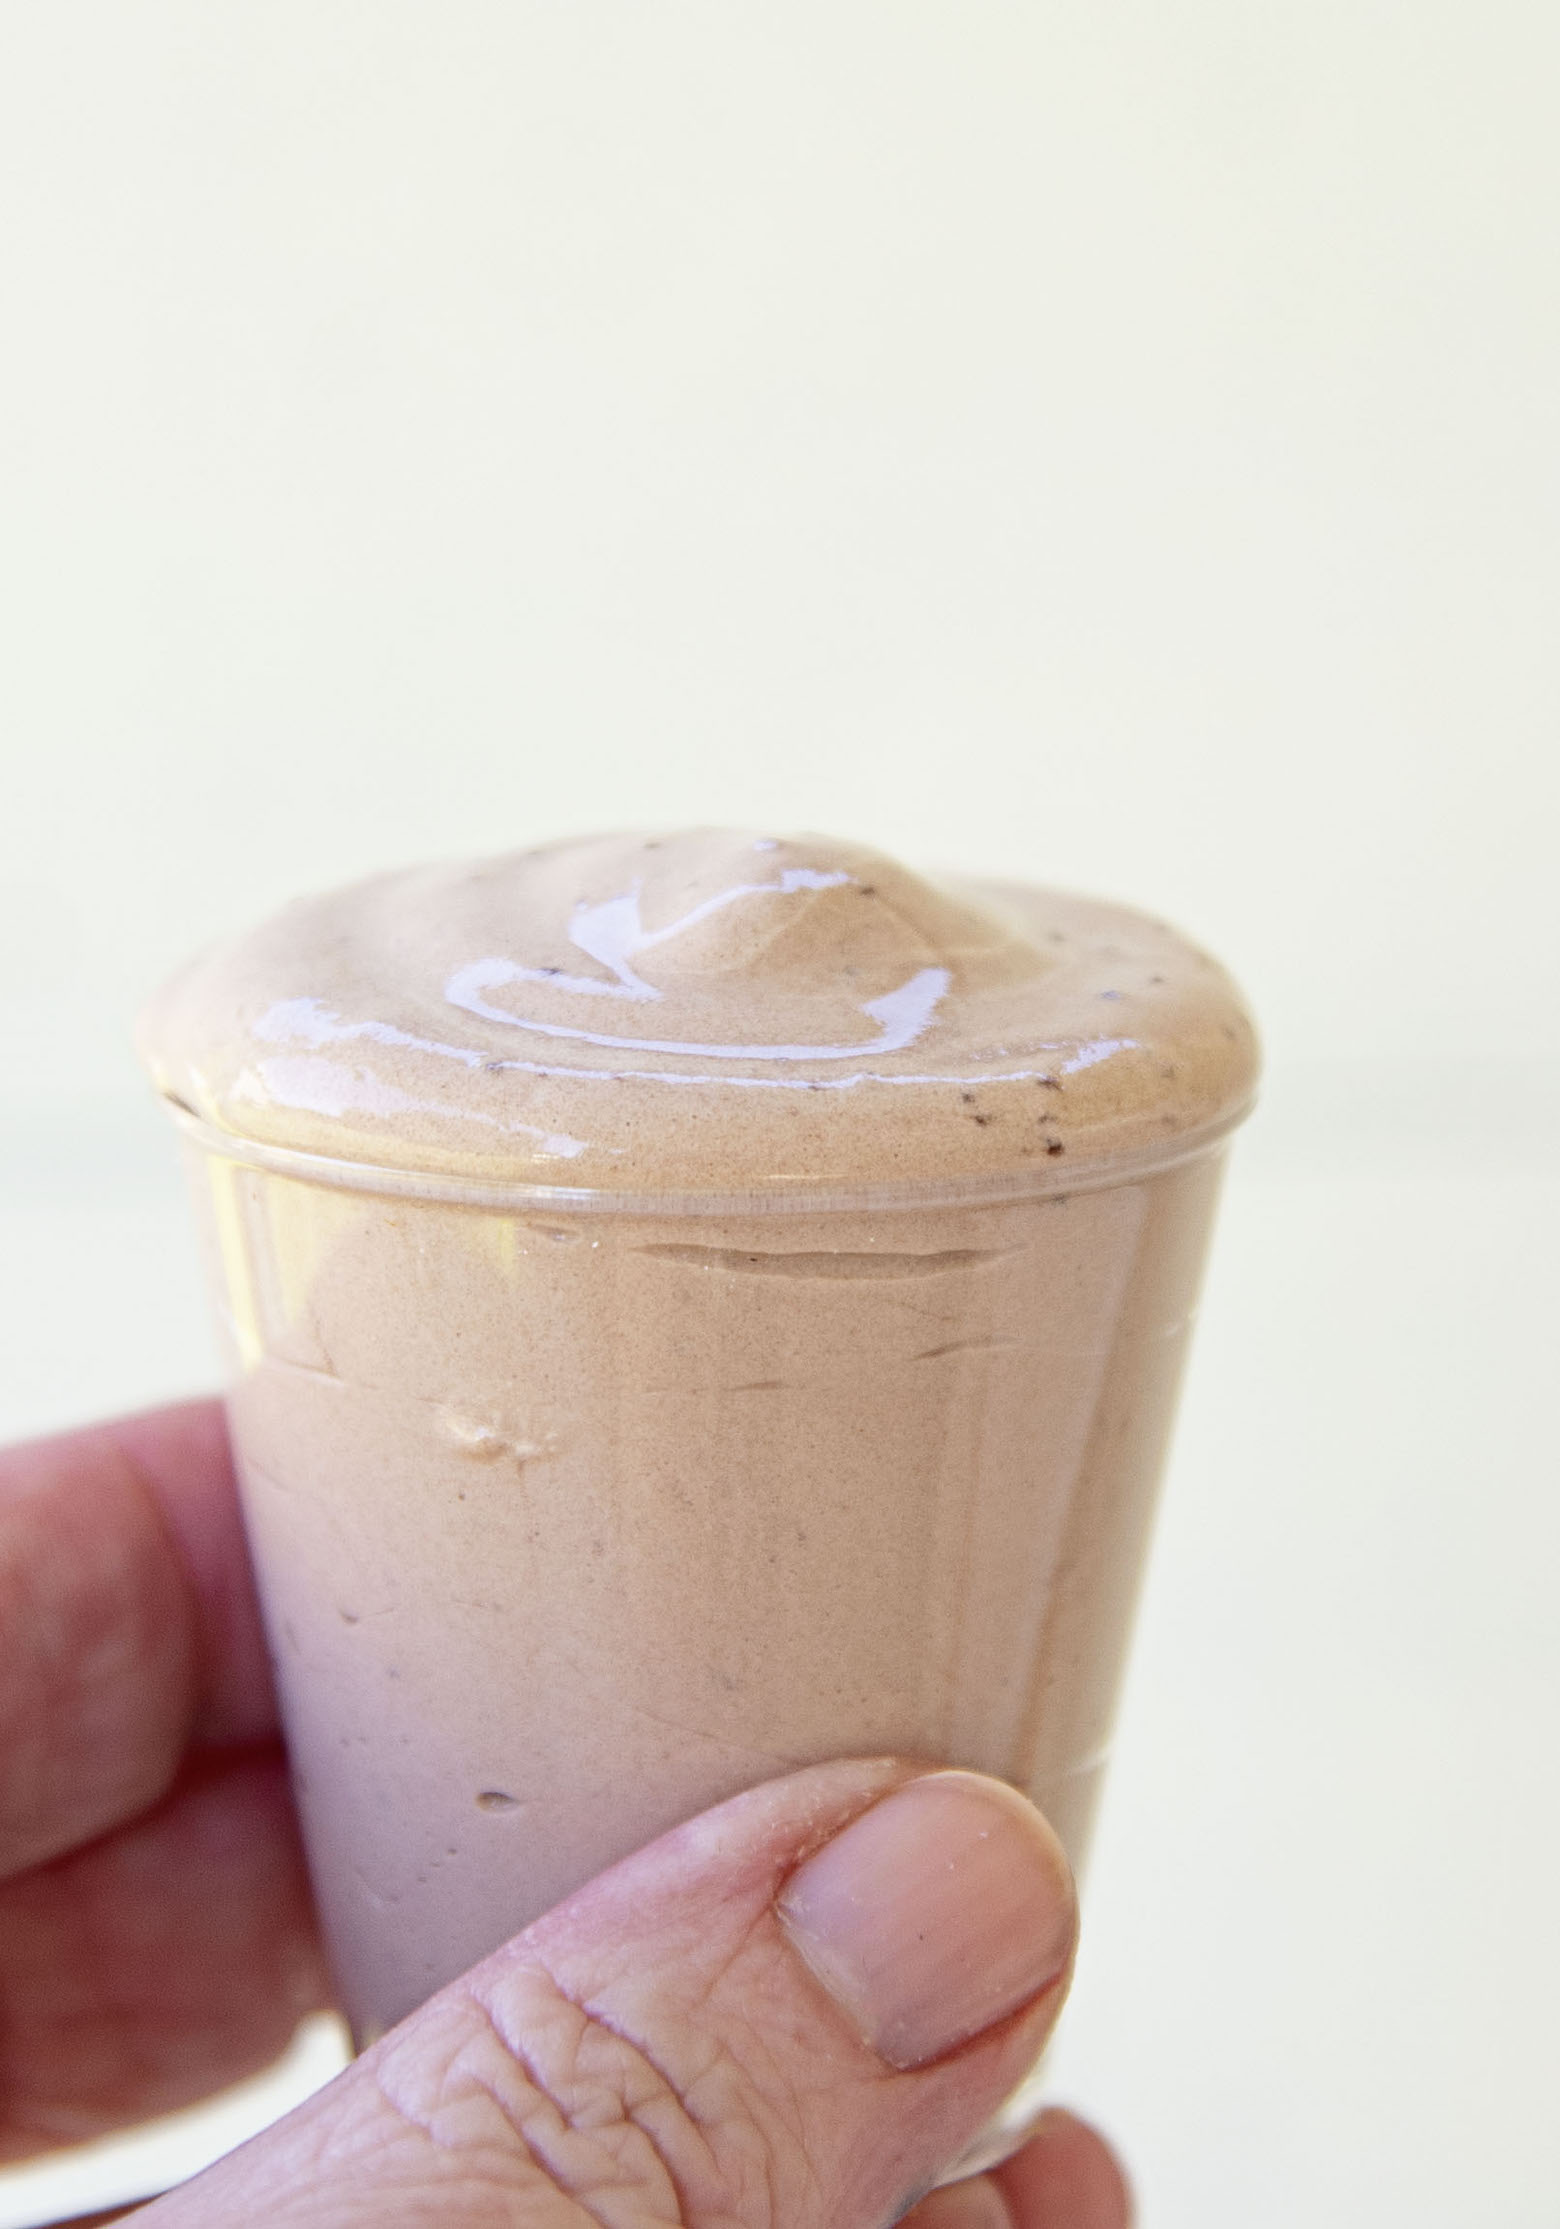  Chocolate Frosty Pudding Shot being held in fingers.